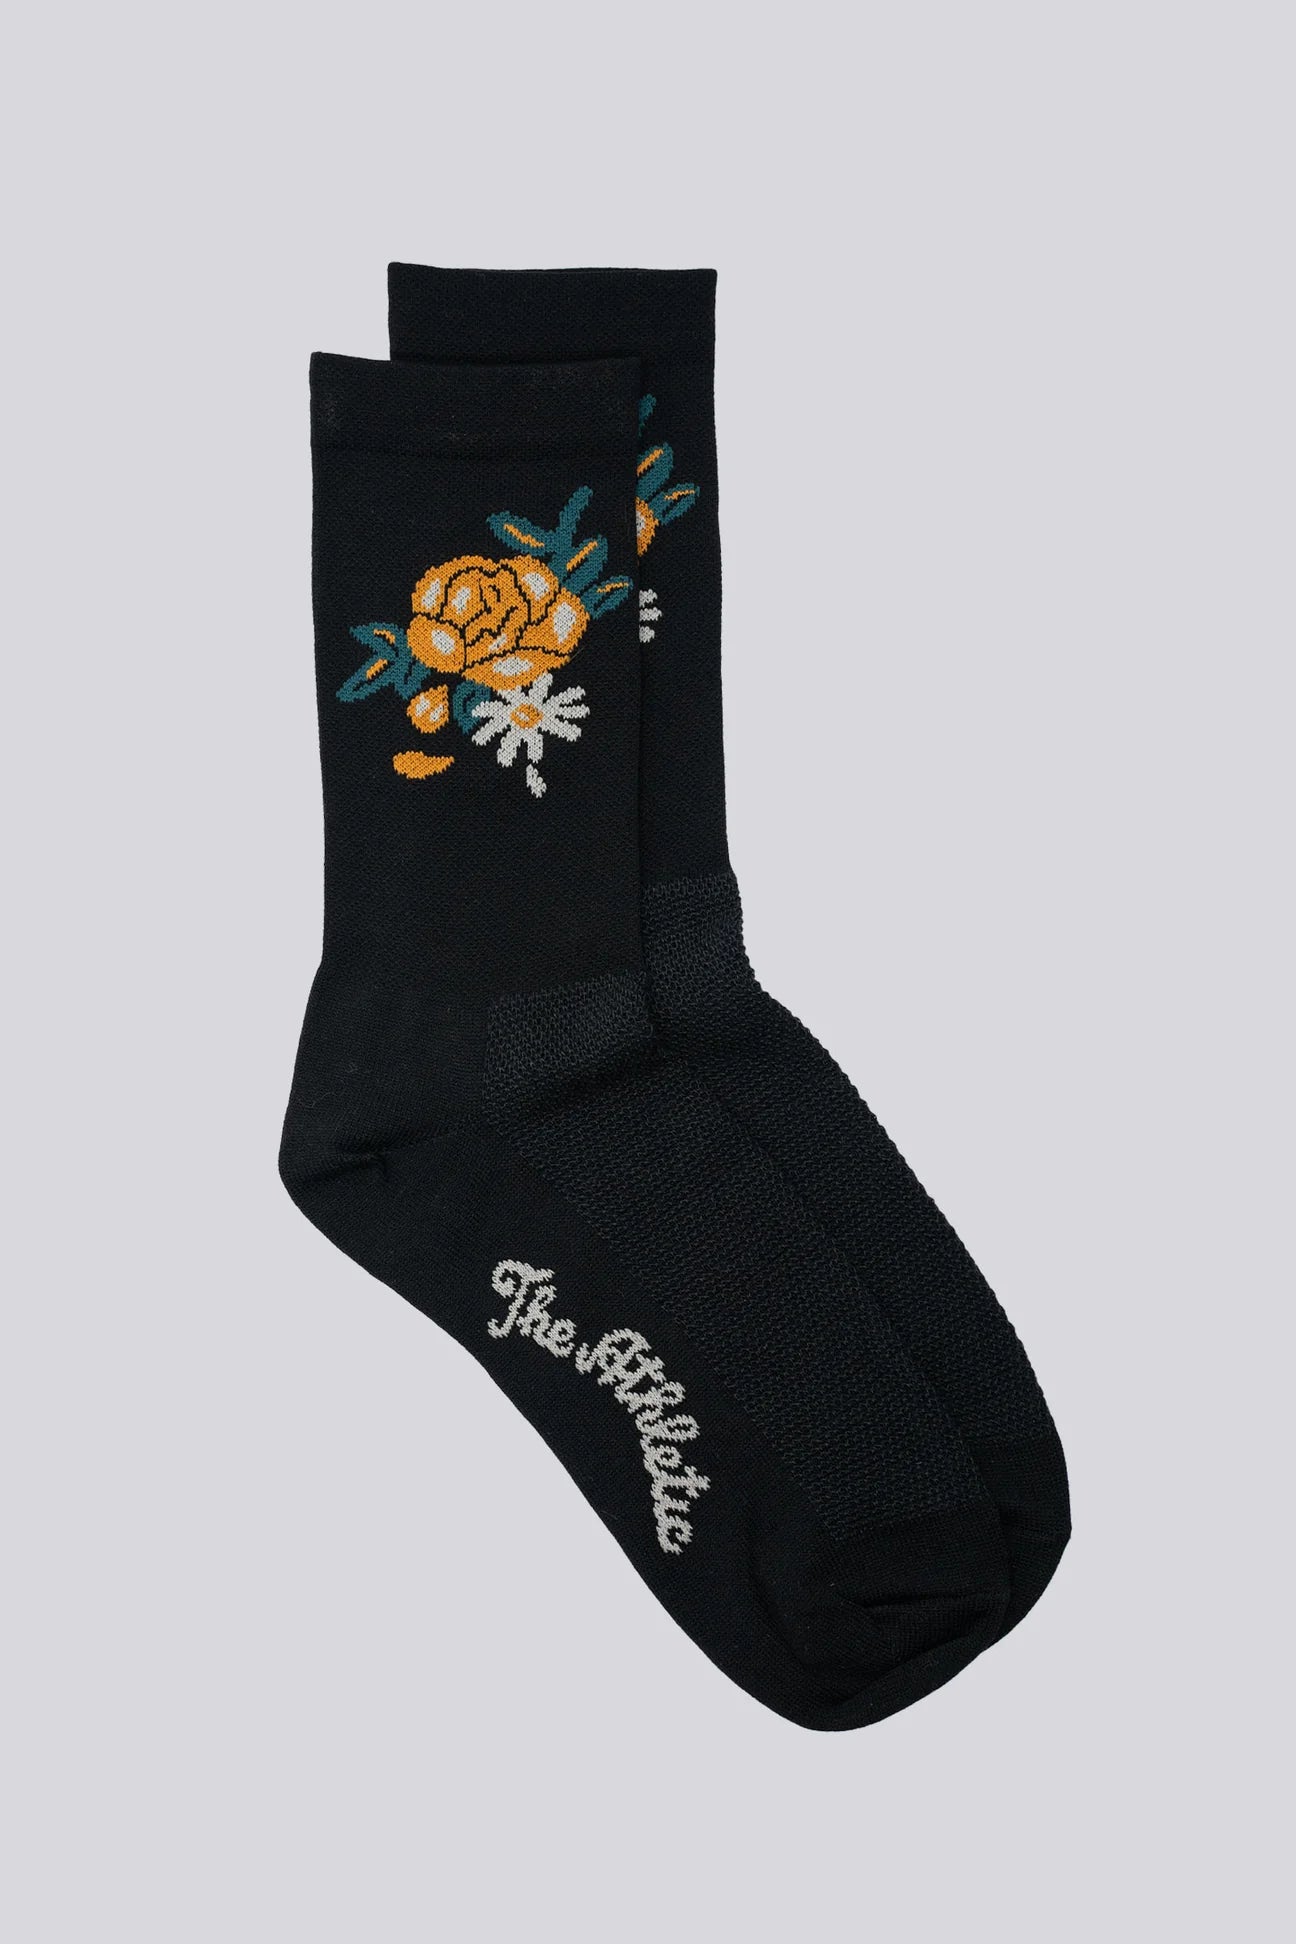 THE ATHLETIC COMMUNITY Ode To The Rose City Cycling Socks